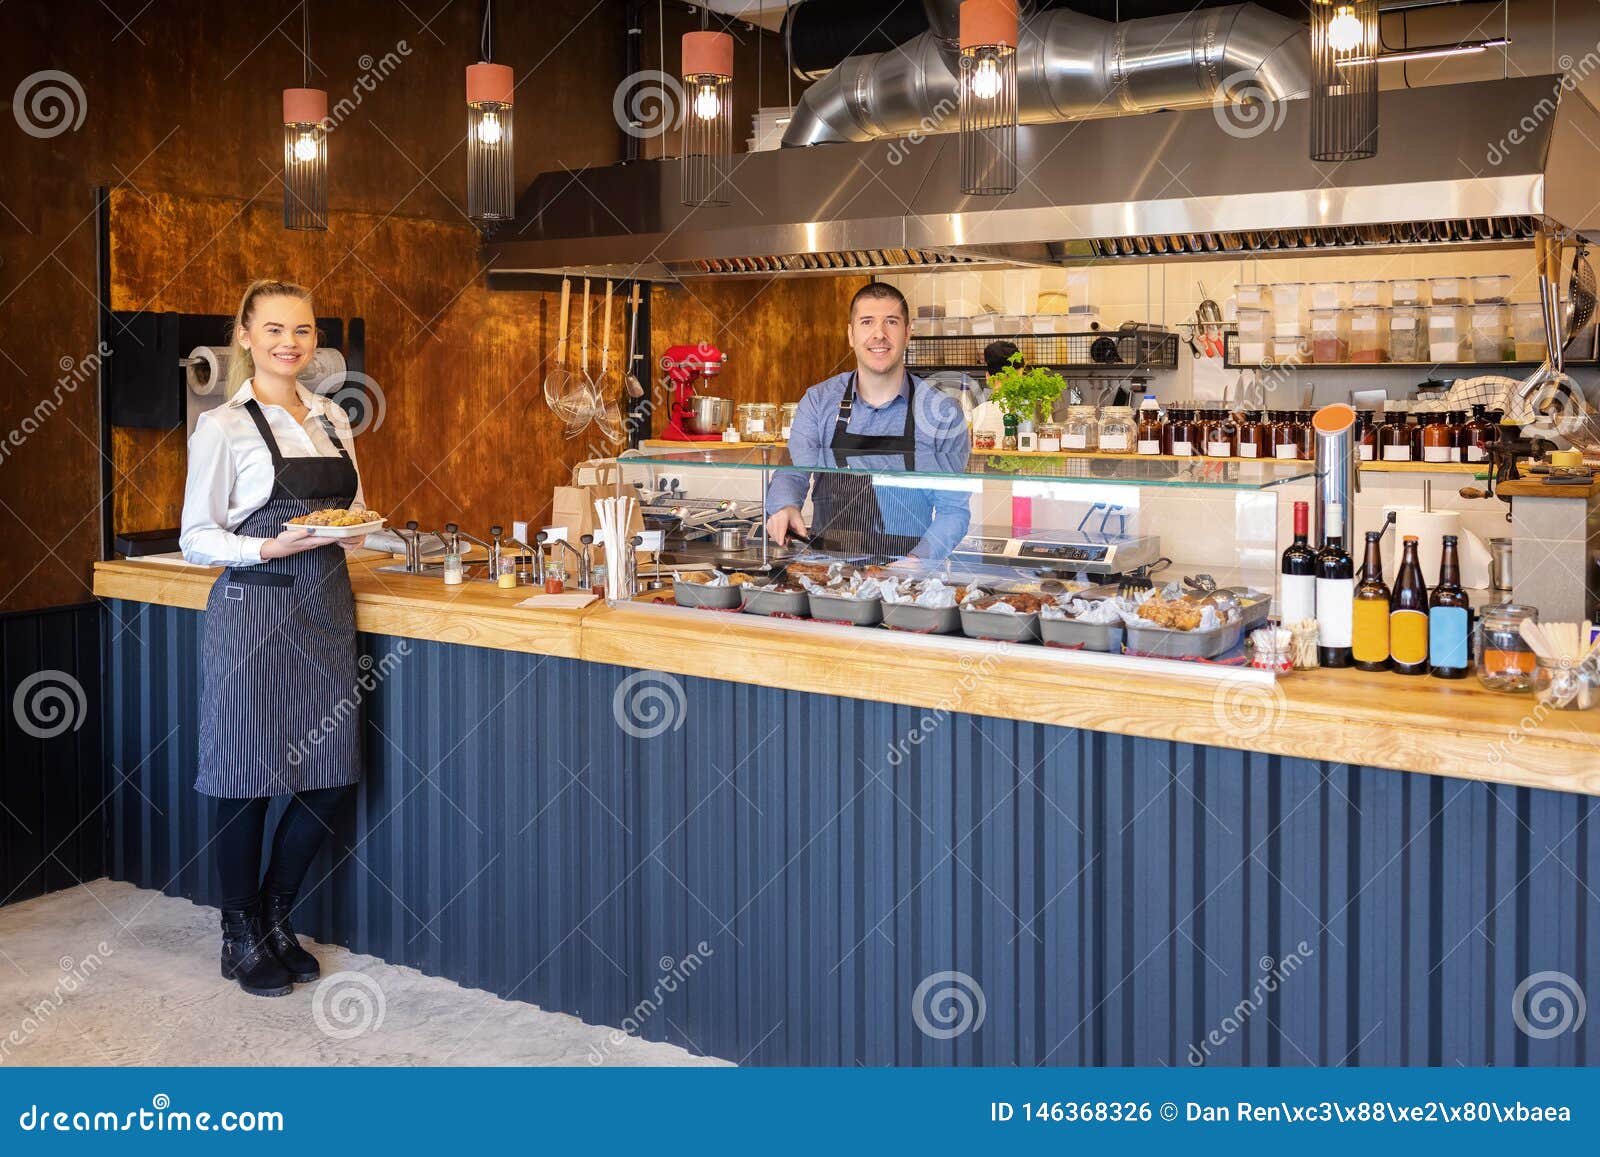 counter service at modern bistro with smiling waiters serving food Ã¢â¬â happy business owners in small restaurant with open kitchen